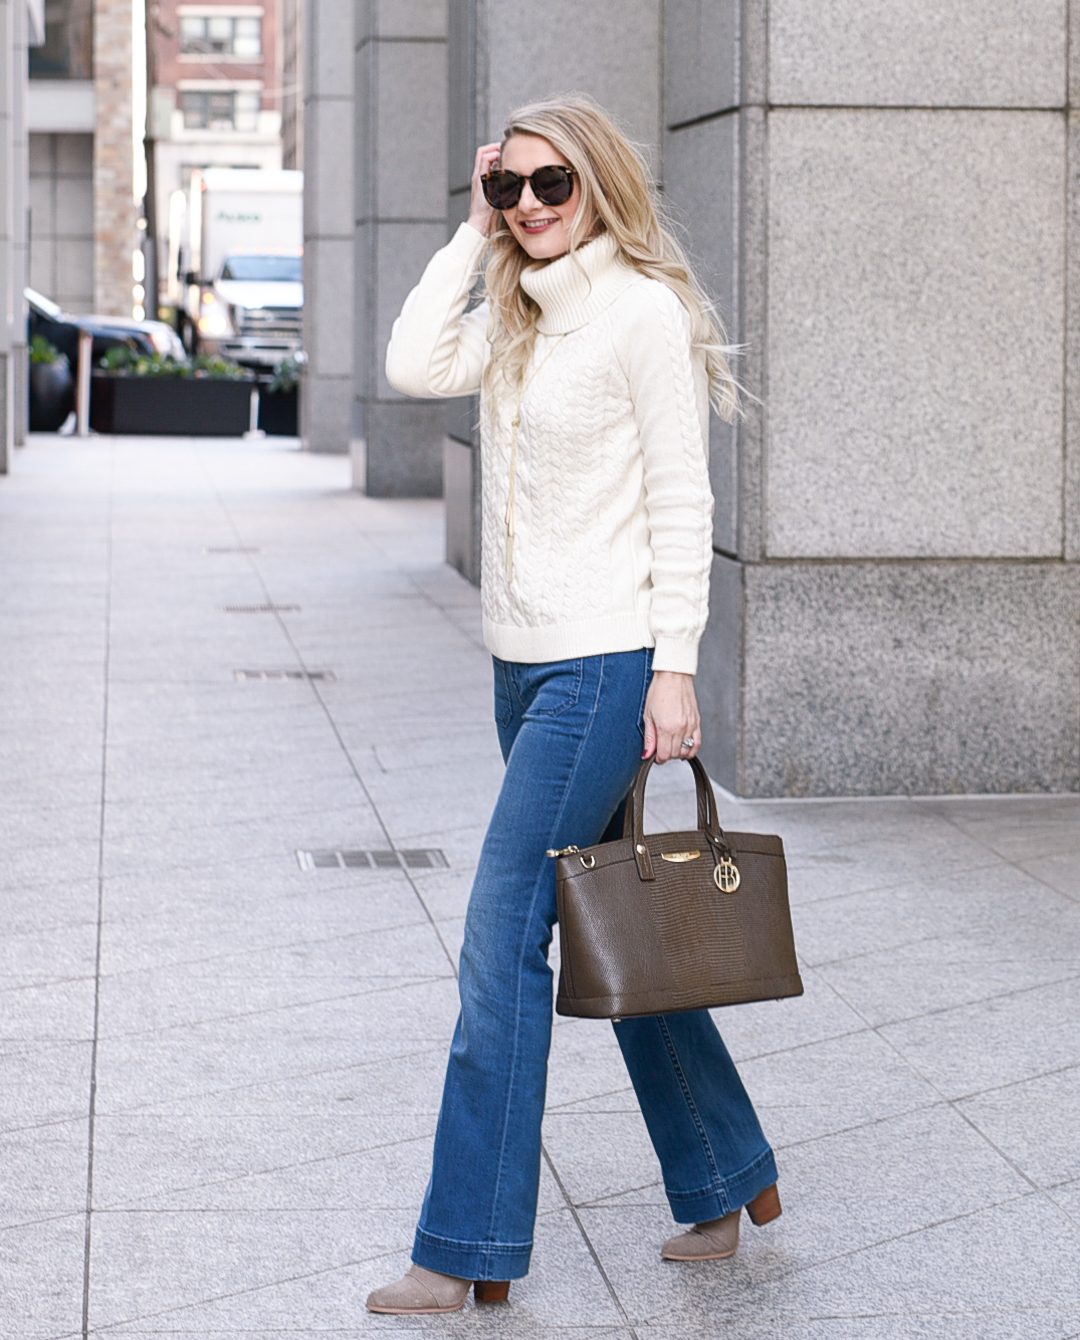 Jenna Colgrove wearing flared jeans and a cozy white sweater for winter.